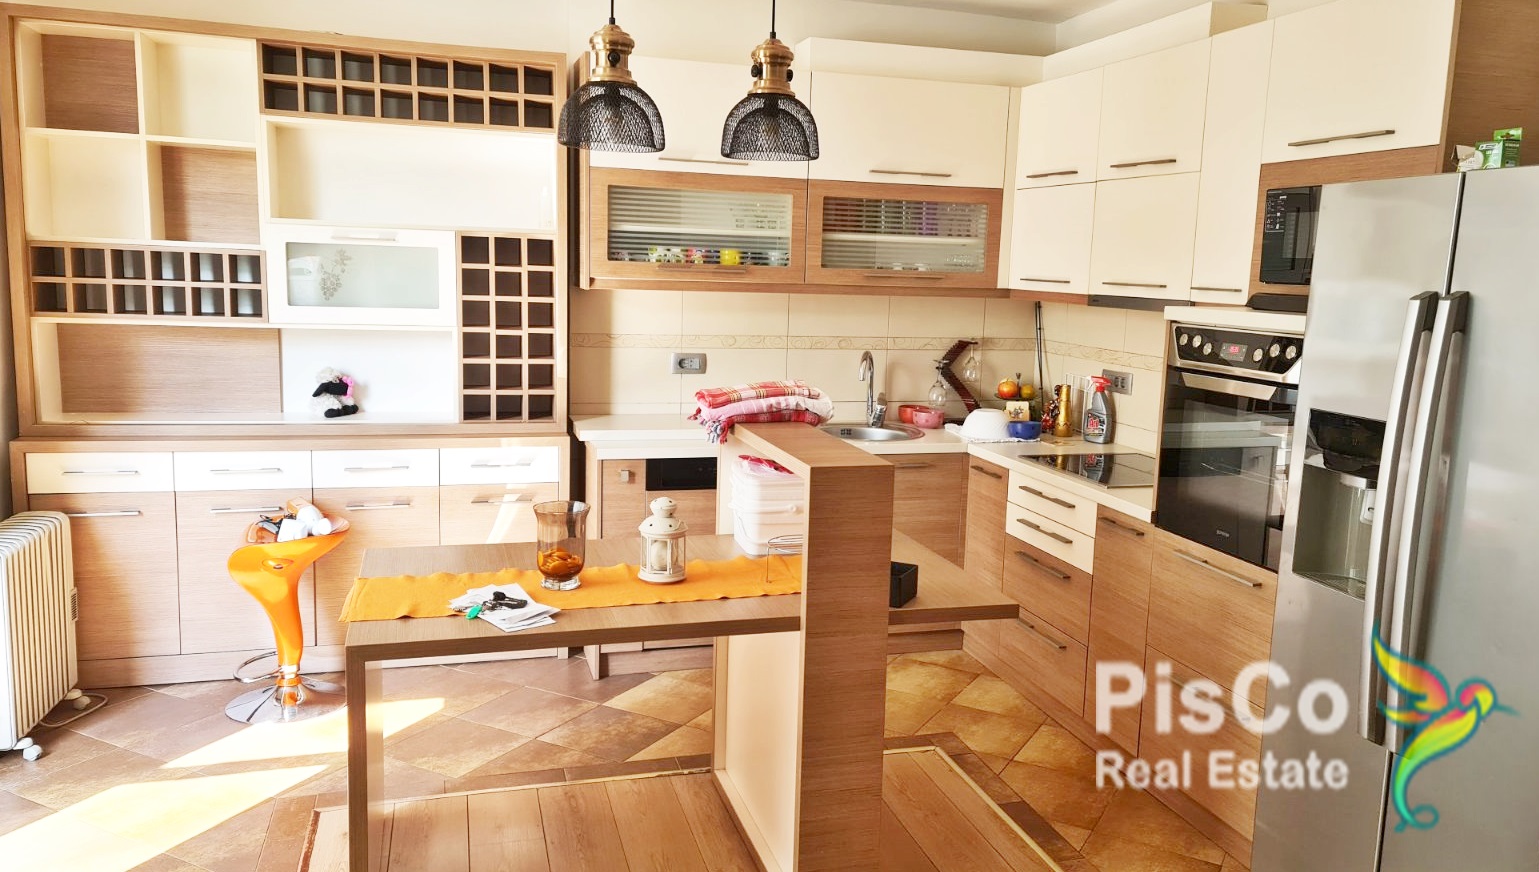 FOR RENT A fully furnished one bedroom apartment – Preko Morače 54m2